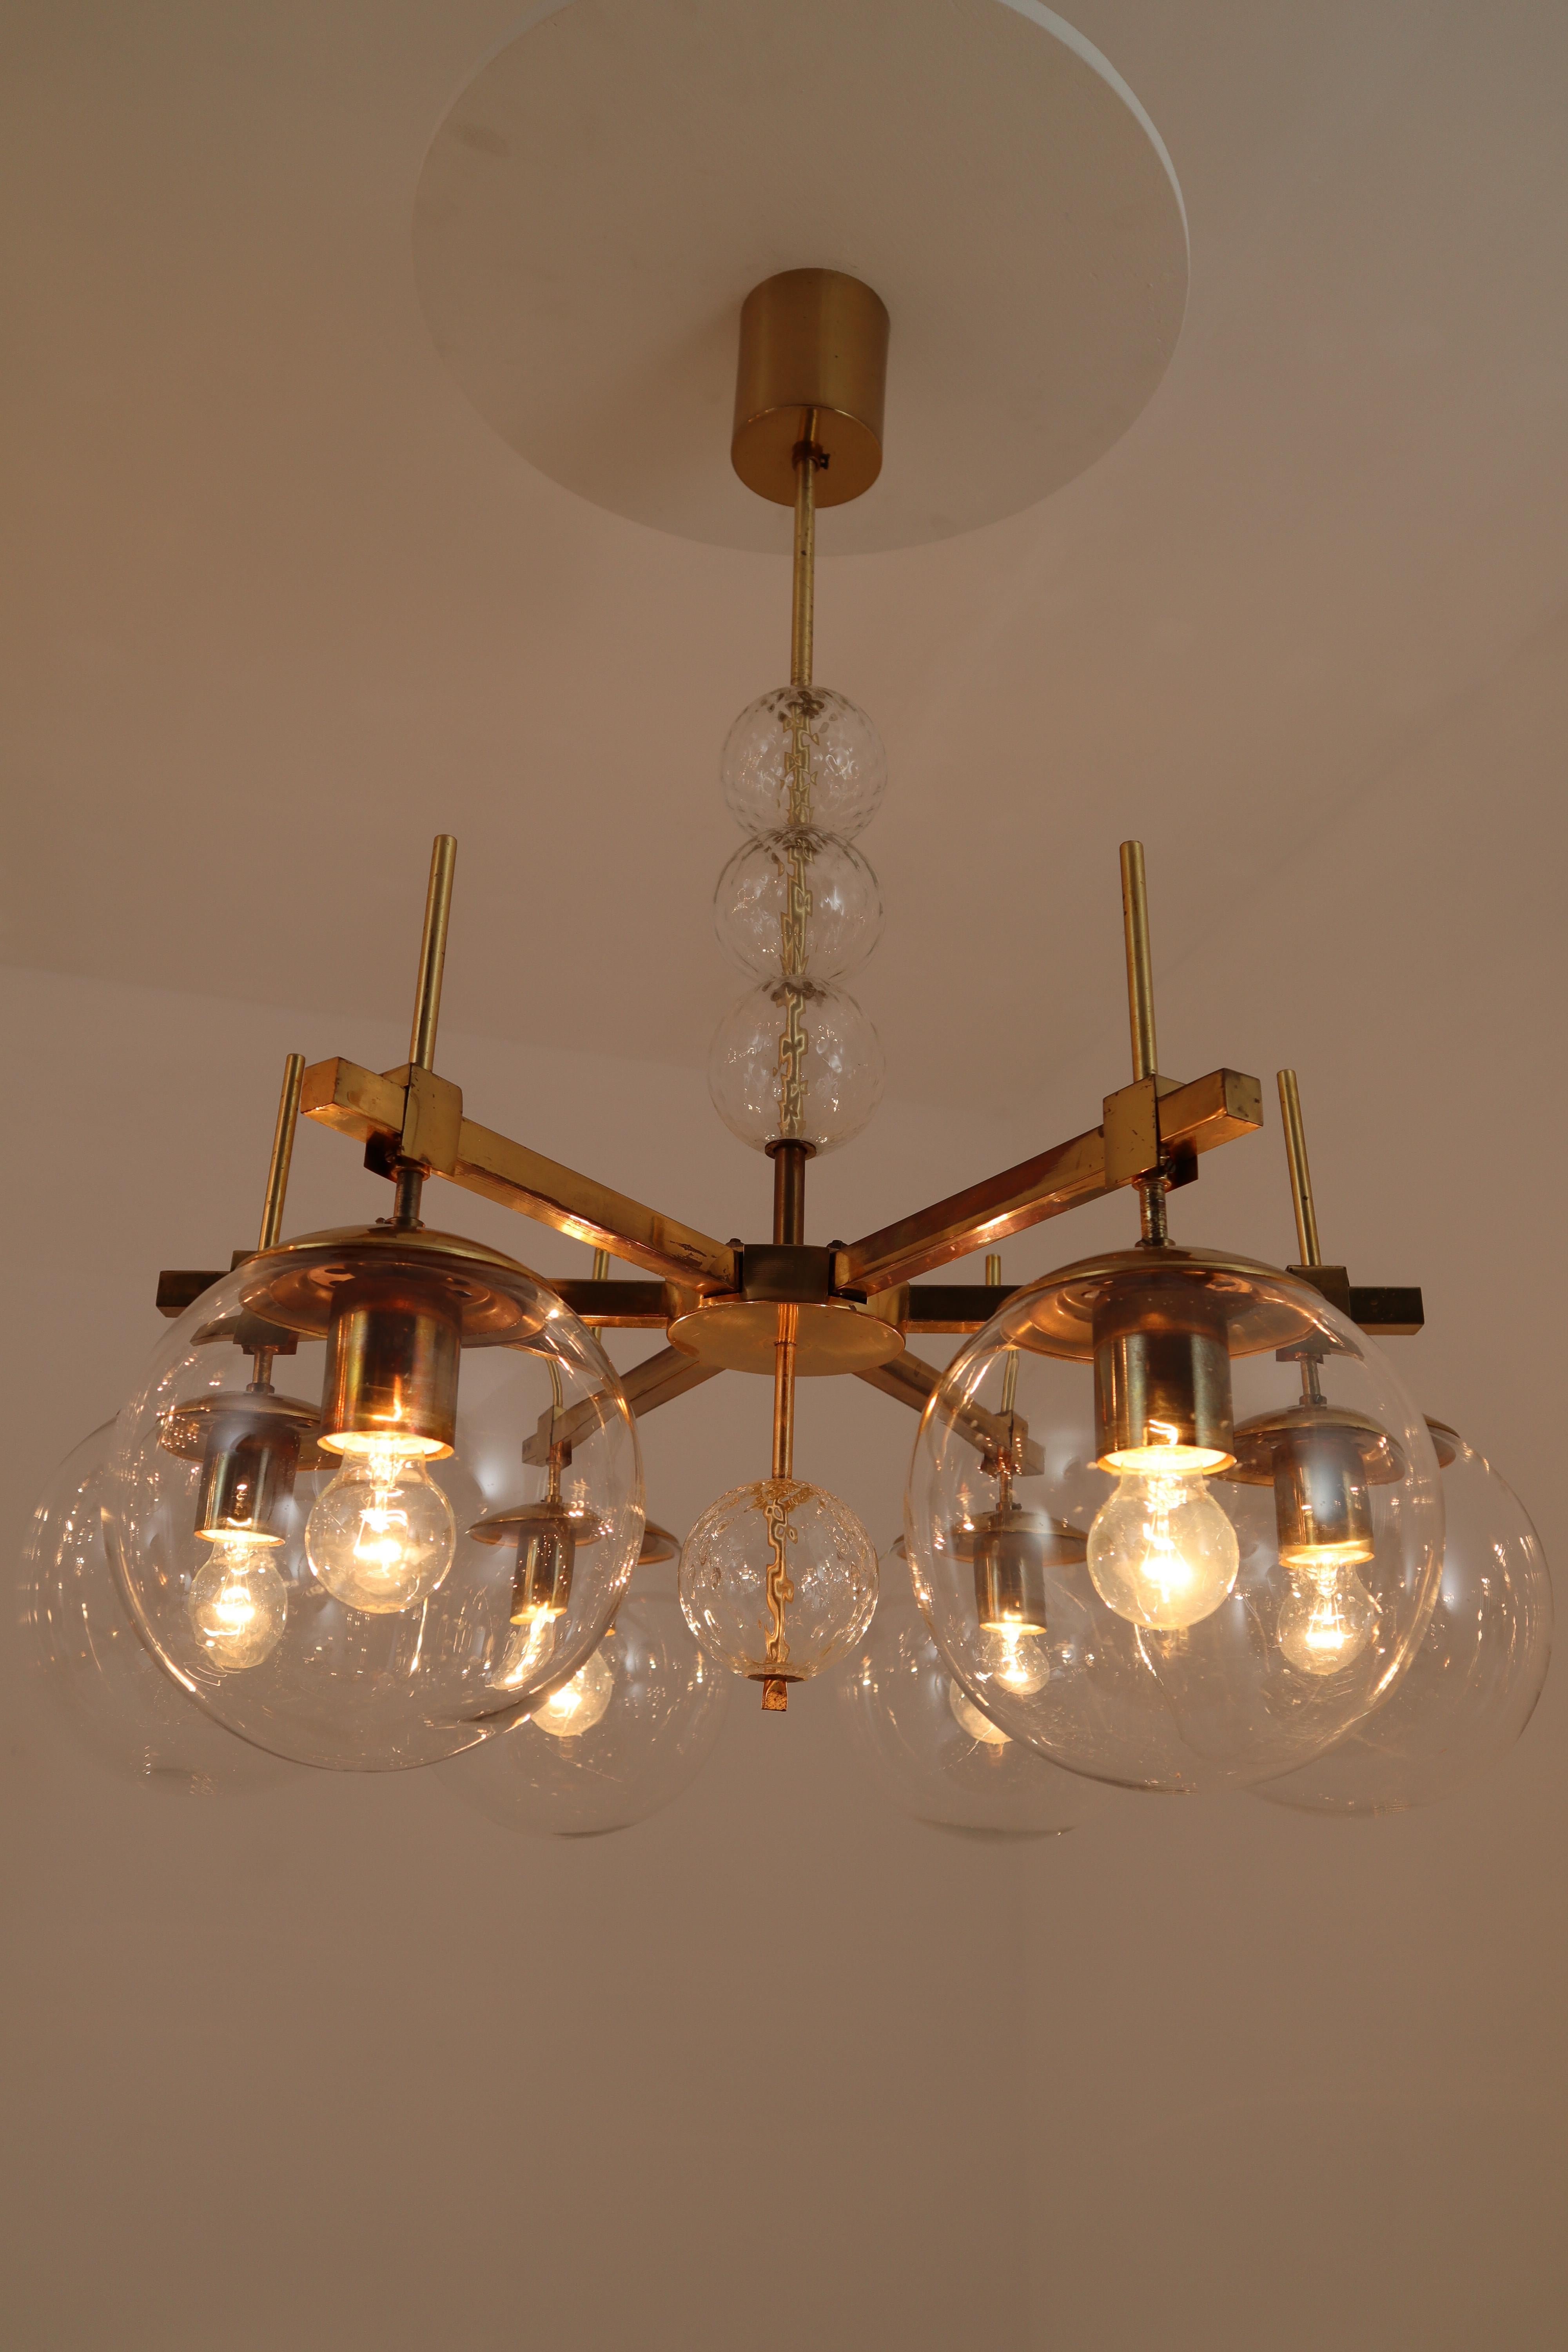 Six Midcentury Chandeliers with Brass Fixture and Hand-Blown Glass, Europe 5